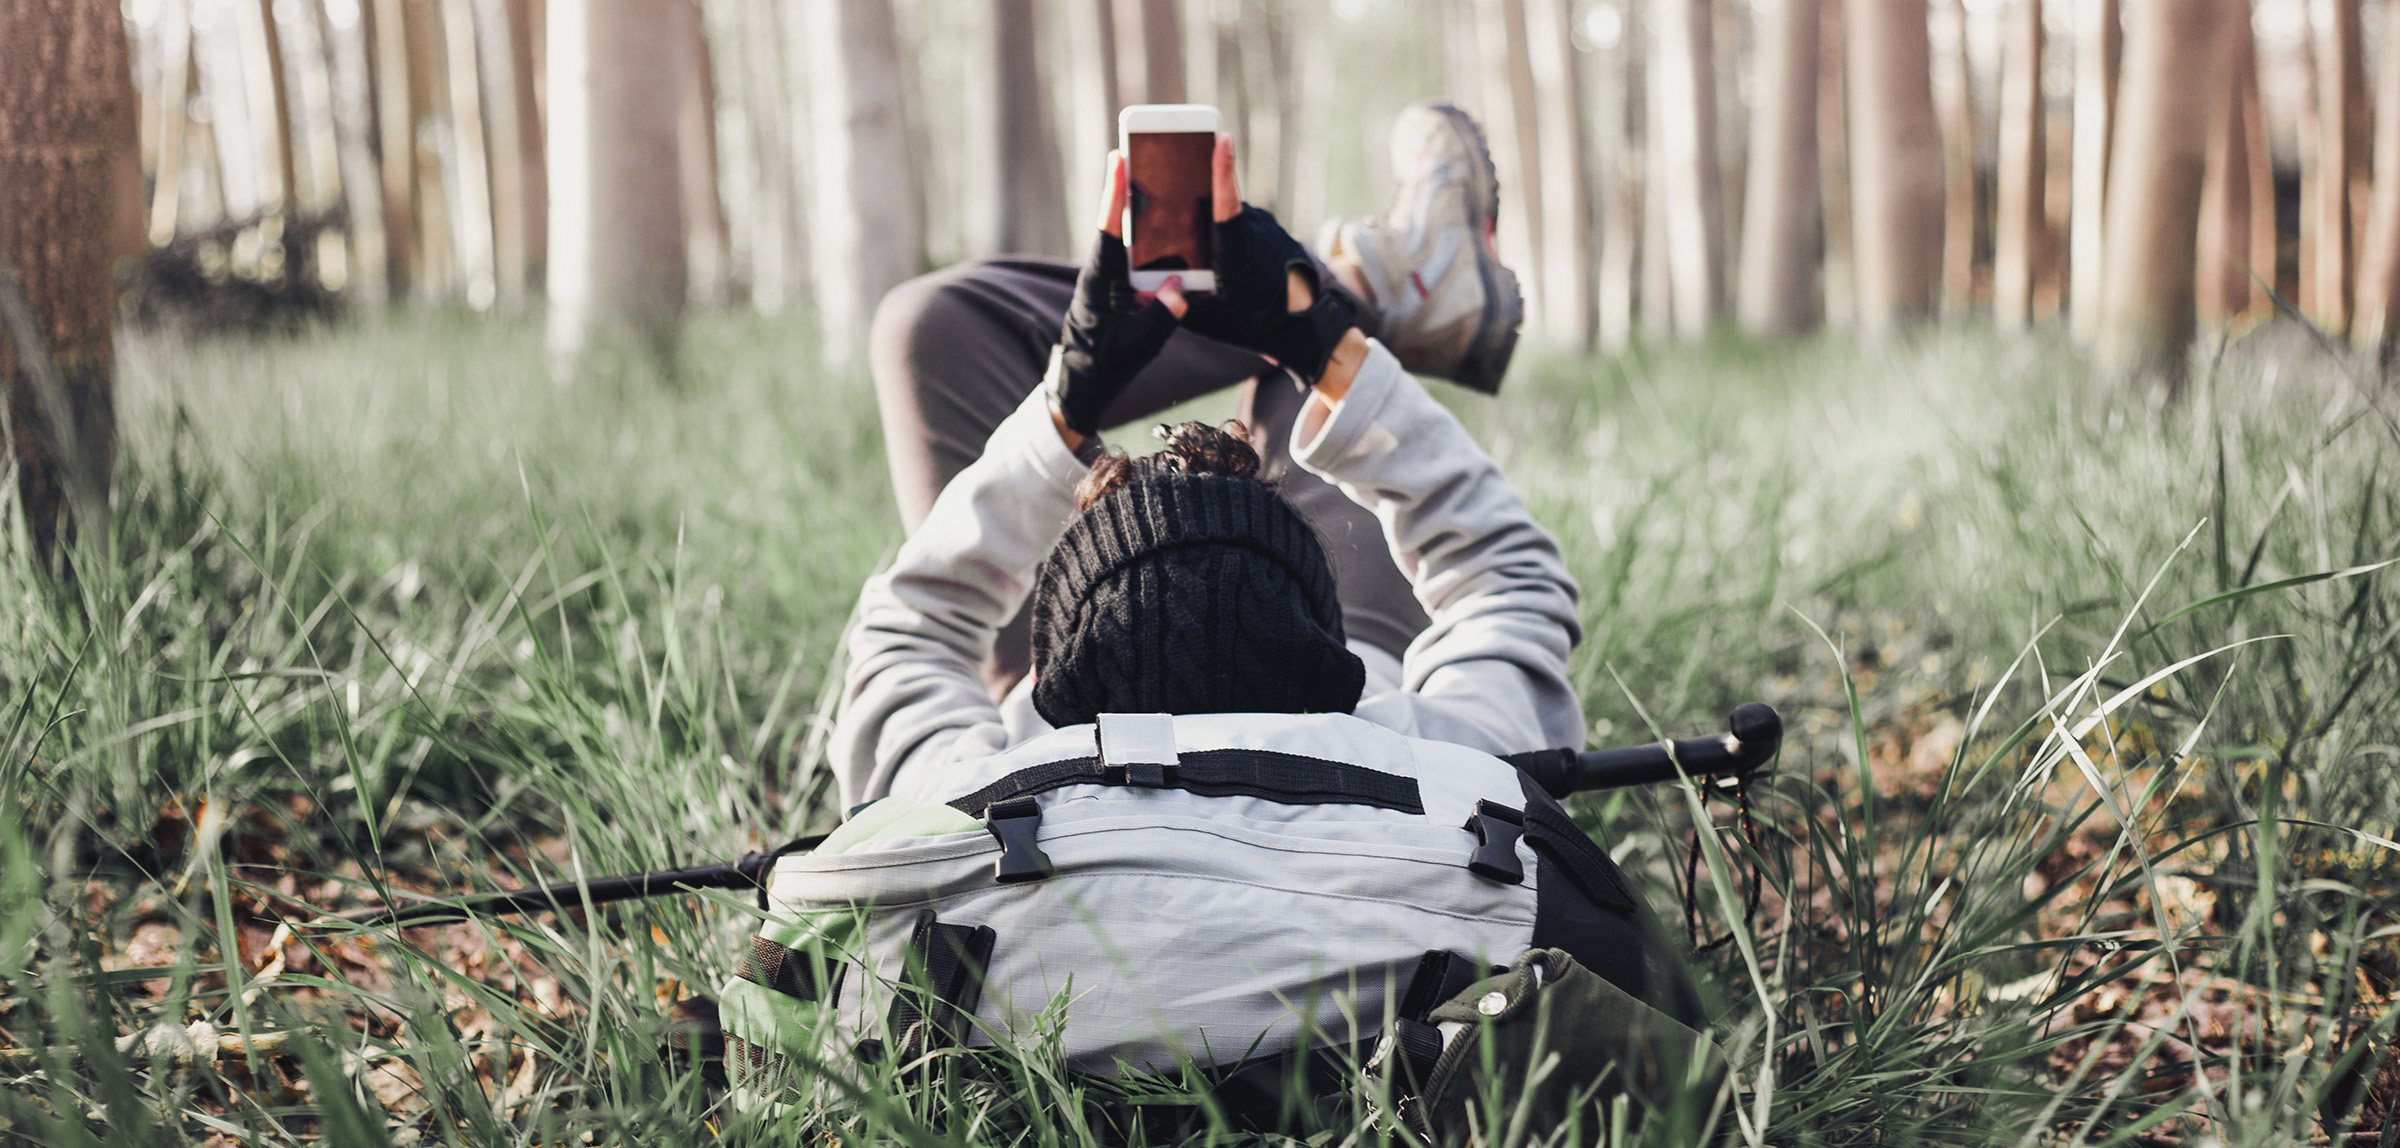 Hiker lying on back in woods using mobile device